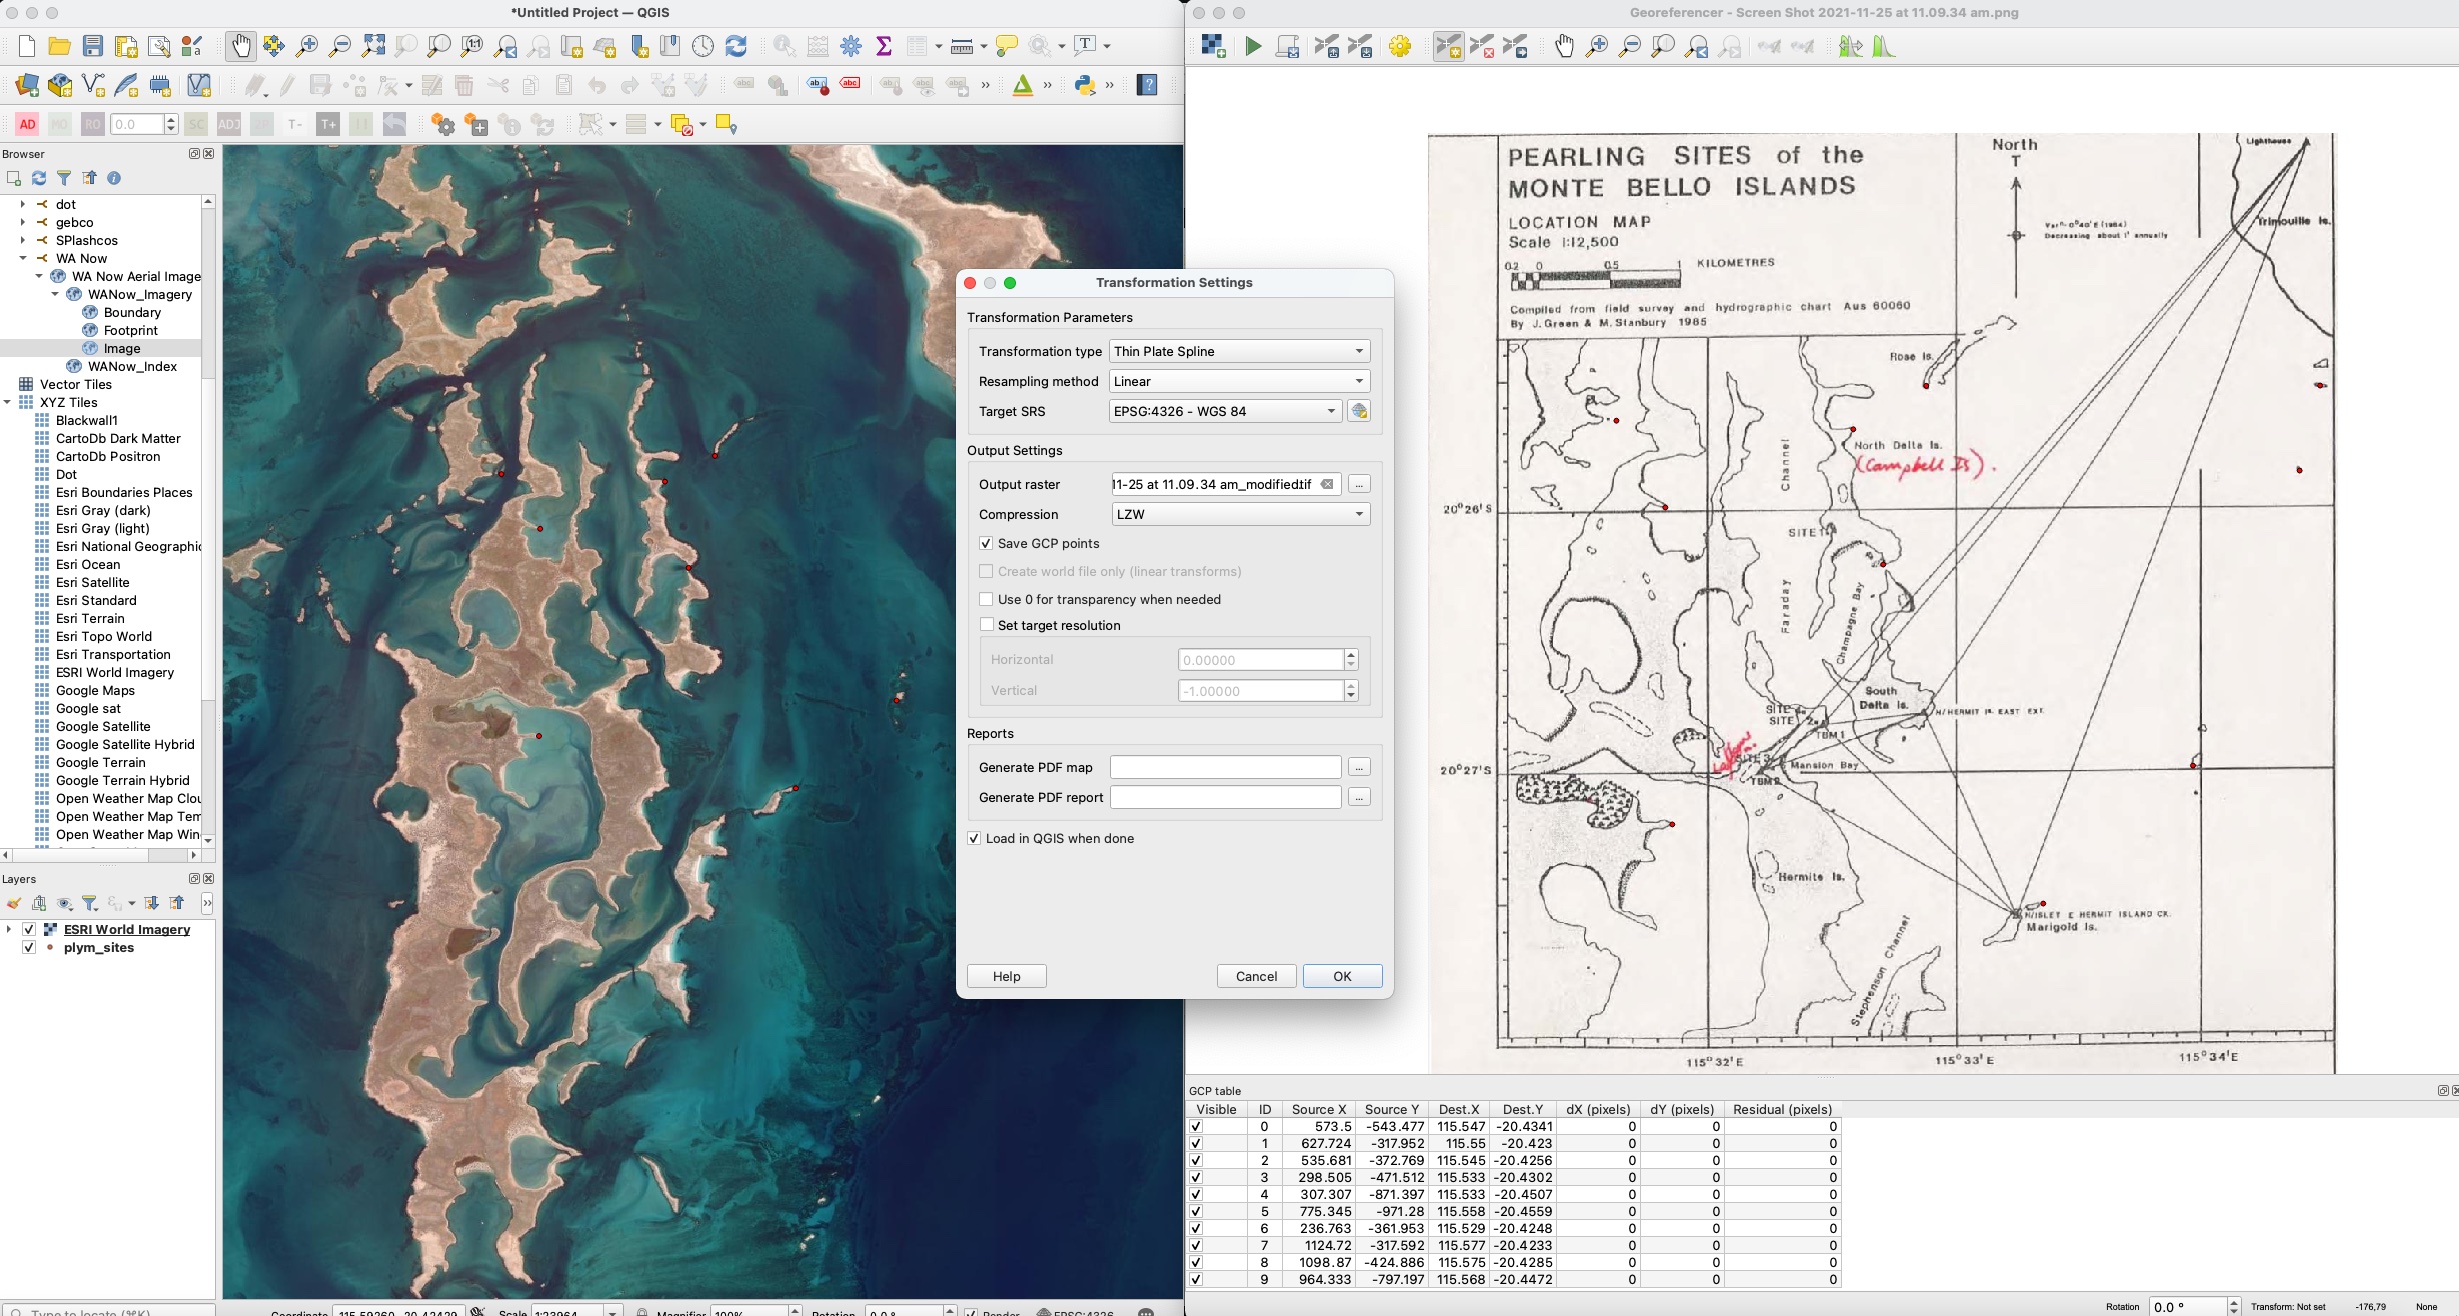 Georeferencing a WA Museum map of pearling sites, using QGIS